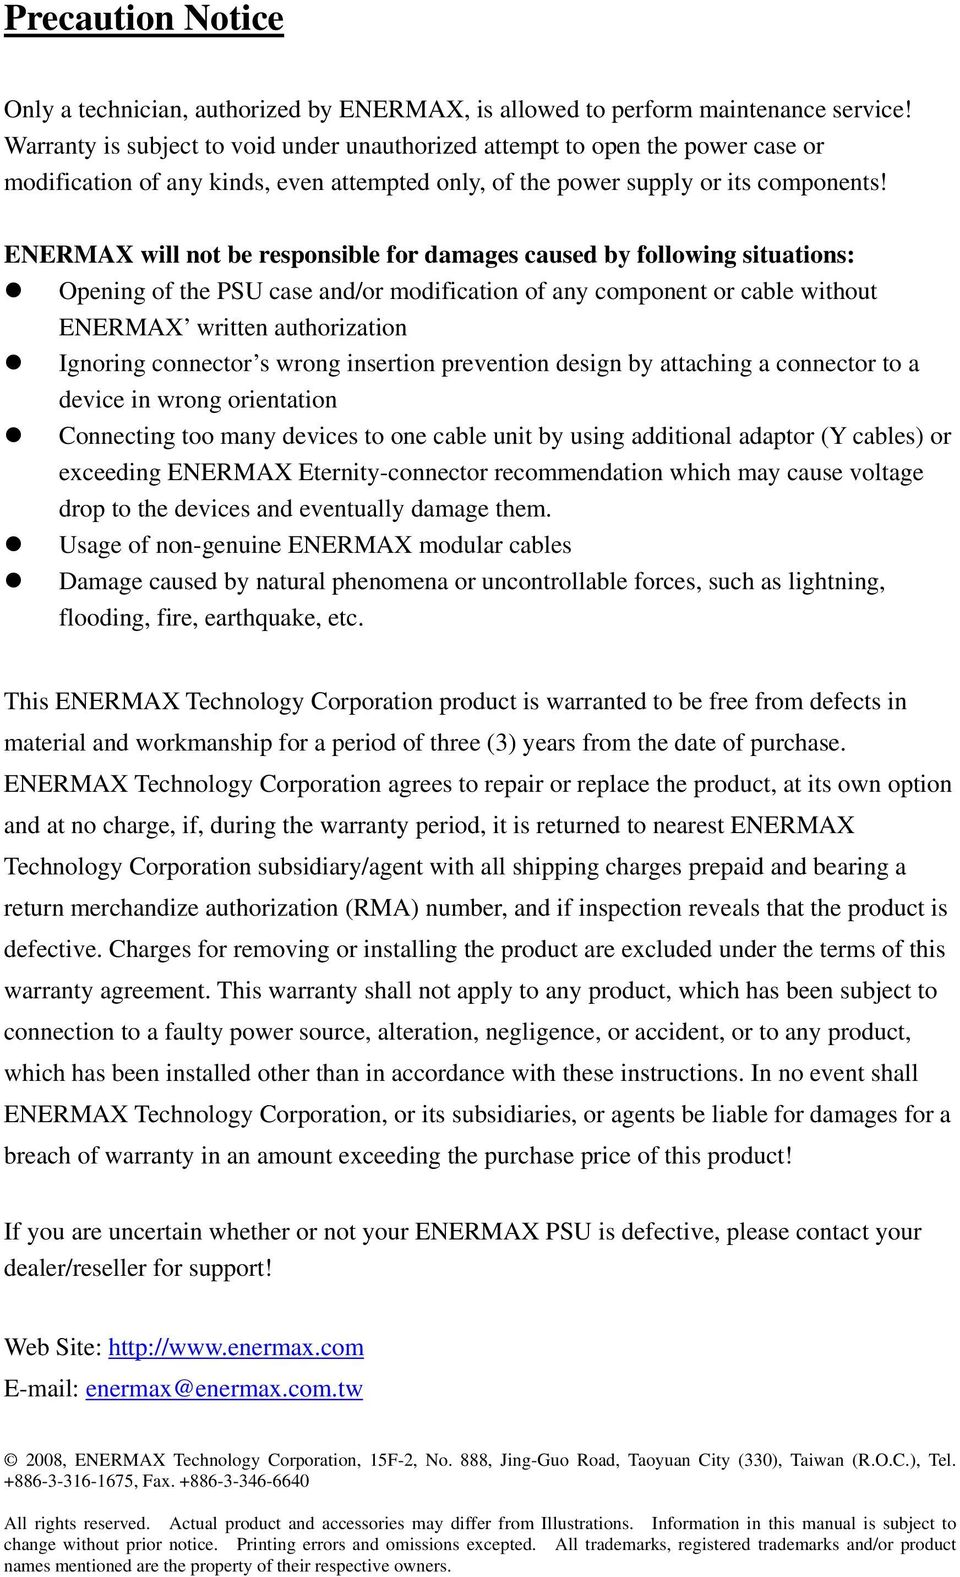 ENERMAX will not be responsible for damages caused by following situations: Opening of the PSU case and/or modification of any component or cable without ENERMAX written authorization Ignoring